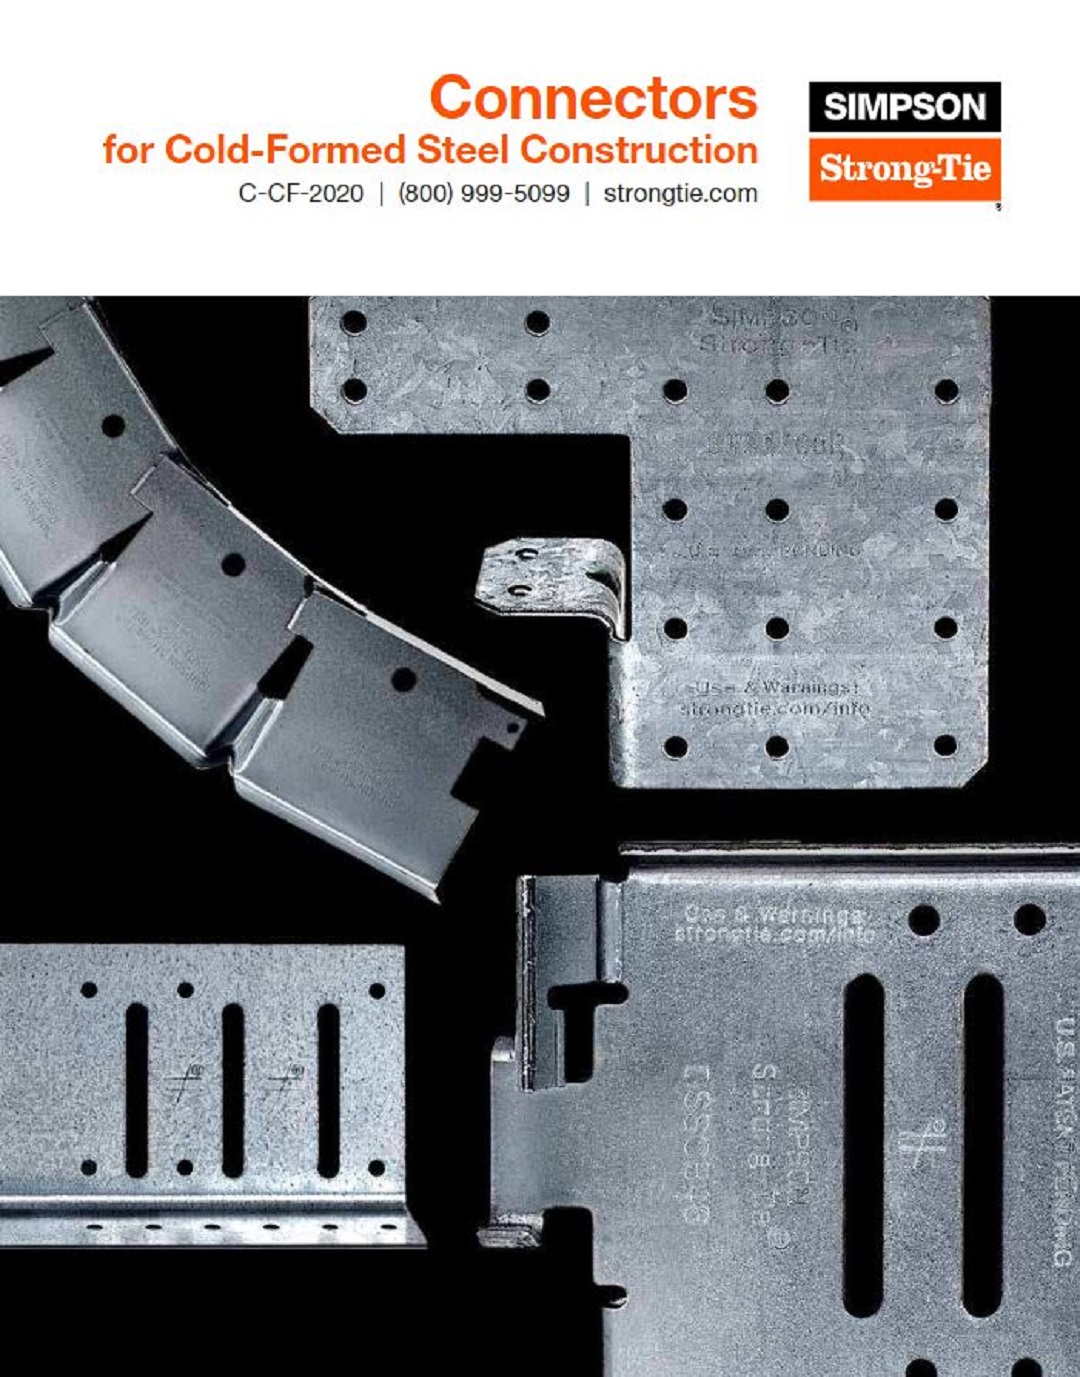 SST CFS Connector catalog cover